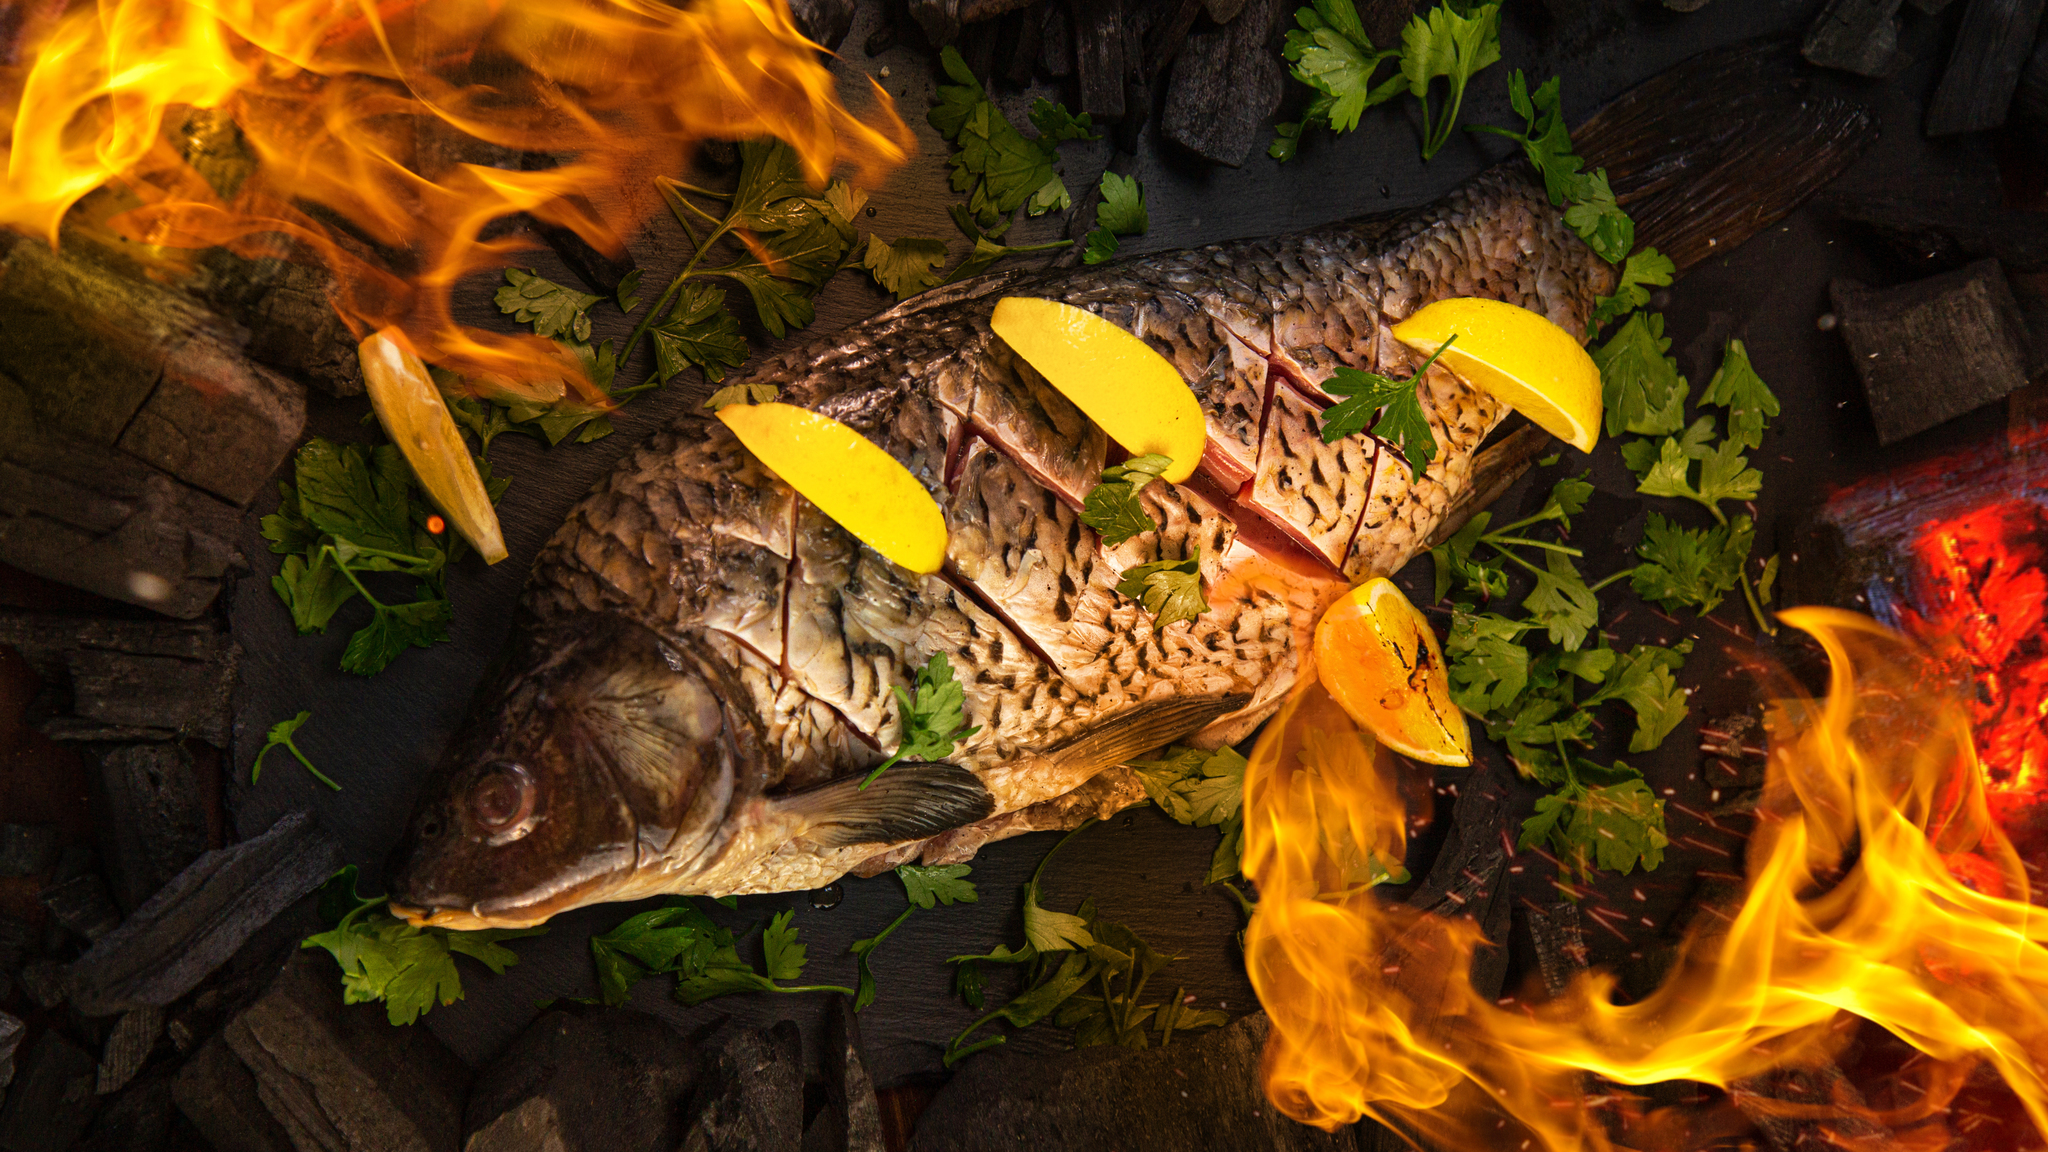 Food photo. Shooting the grill - My, The photo, Fire, Khabarovsk, Meat, Food, Foodphoto, Longpost